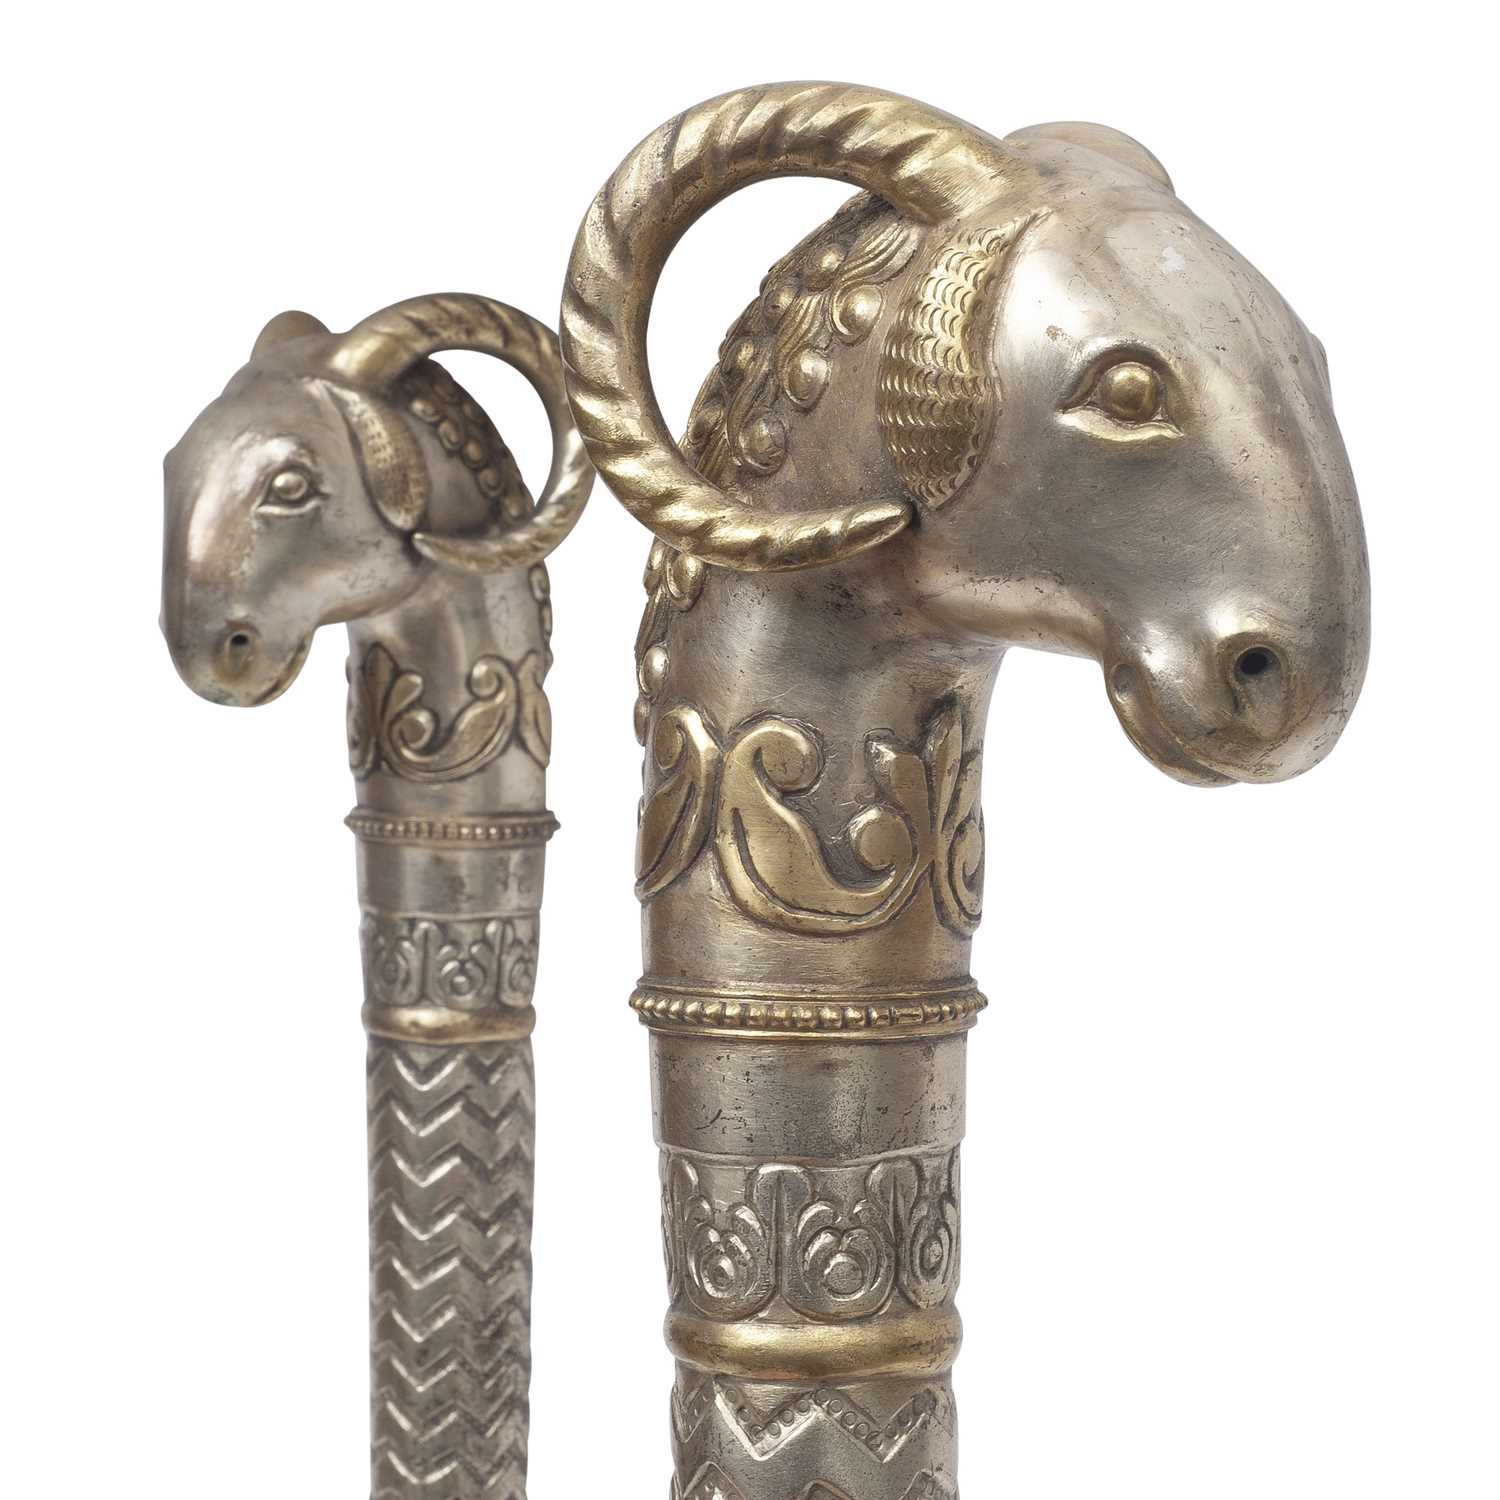 A PAIR OF EARLY 20TH CENTURY INDIAN CEREMONIAL MACES, DECCAN OR NORTHERN INDIA - Image 2 of 2